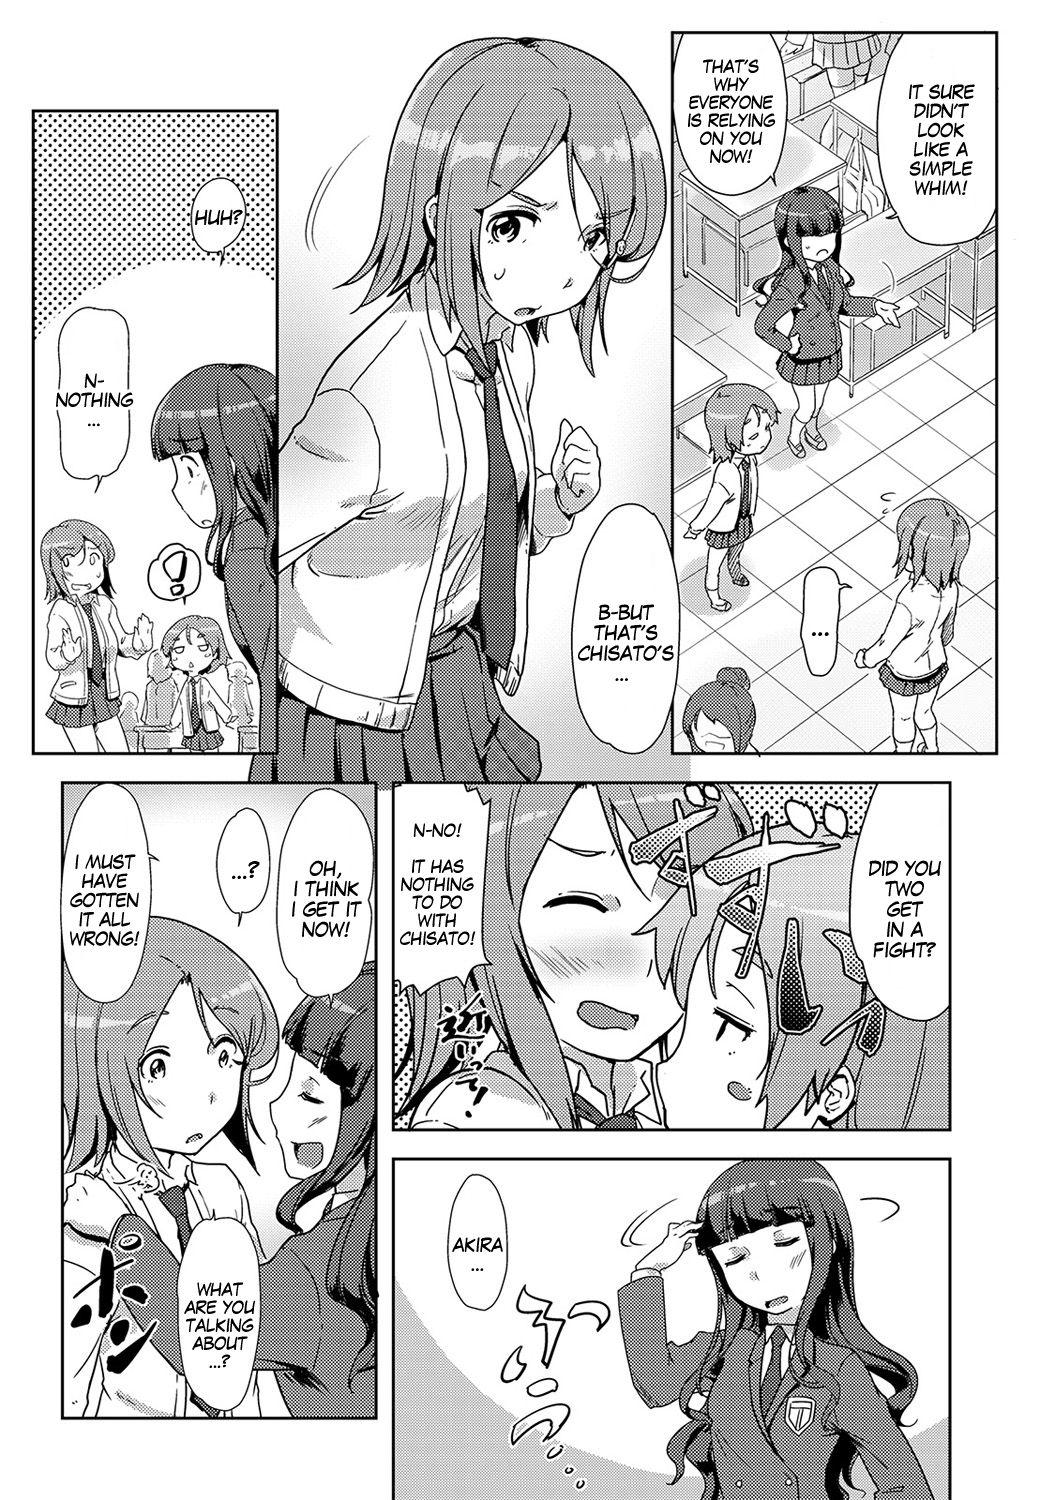 Girl Girl Ecchi Shitara Irekawacchatta!? | We Switched Our Bodies After Having Sex!? Ch. 5 Interracial - Page 6